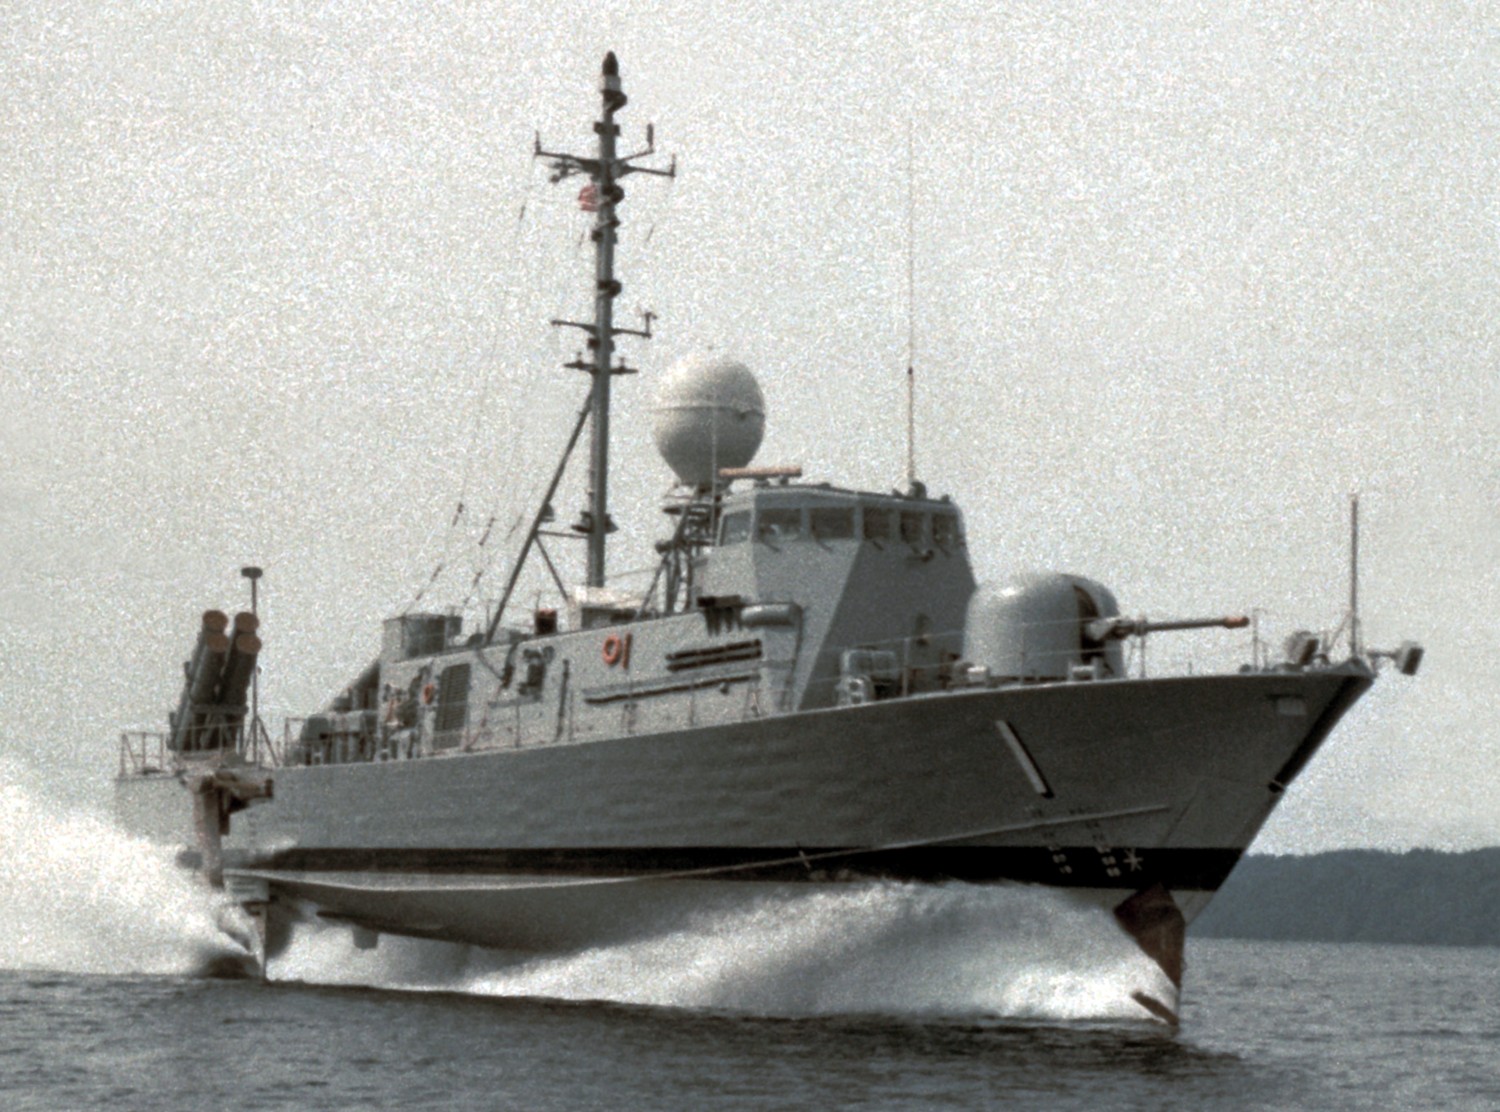 mk-141 missile launching system pegasus class patrol hydrofoil boat phm 20